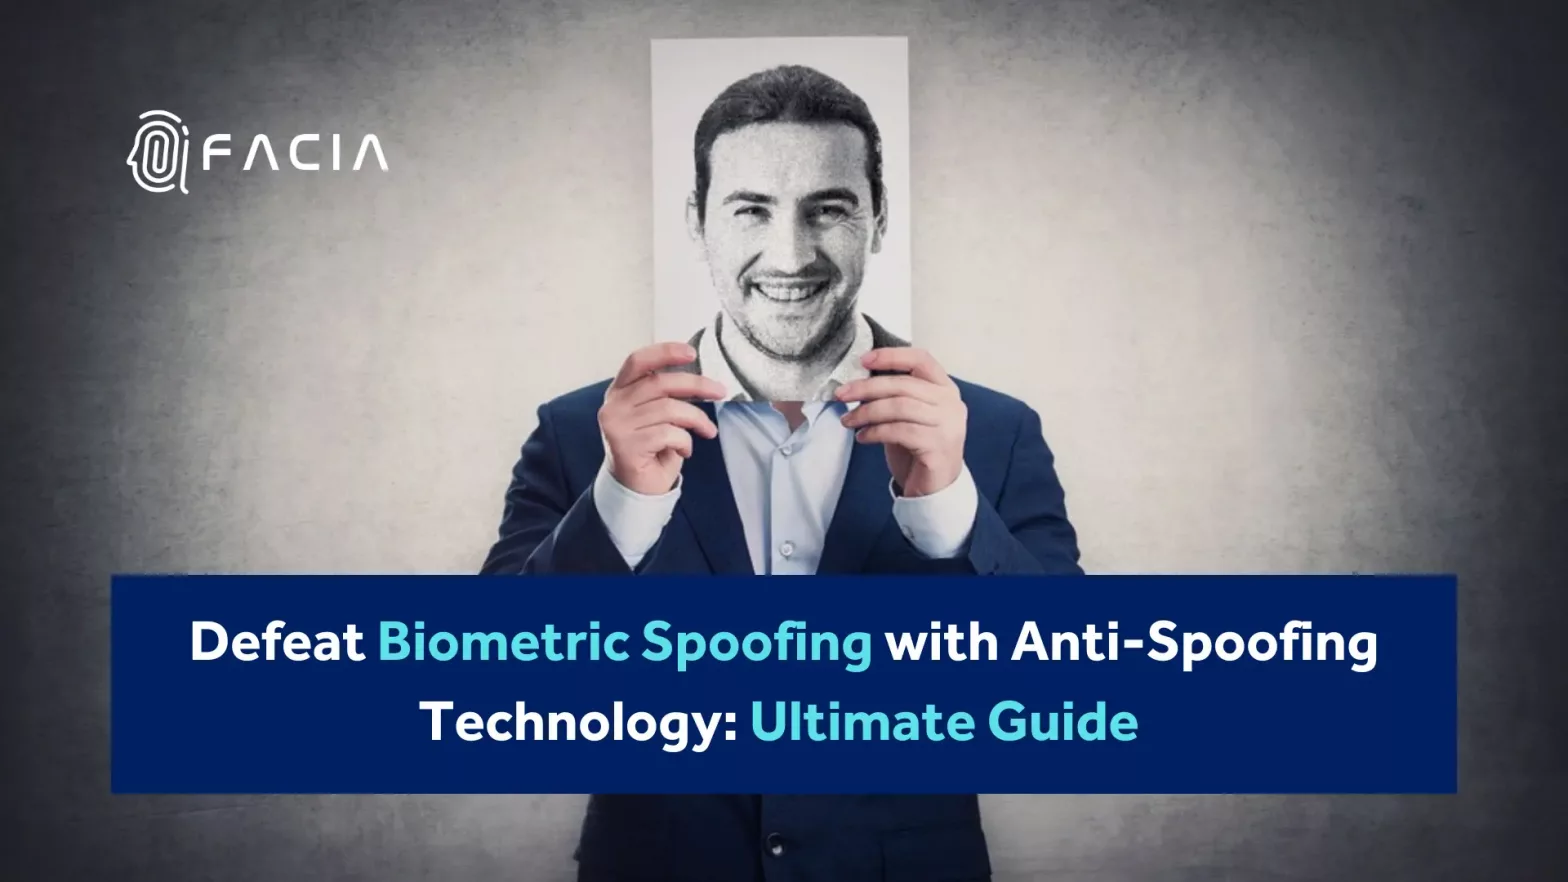 Defeat Biometric Spoofing with Anti-Spoofing Technology